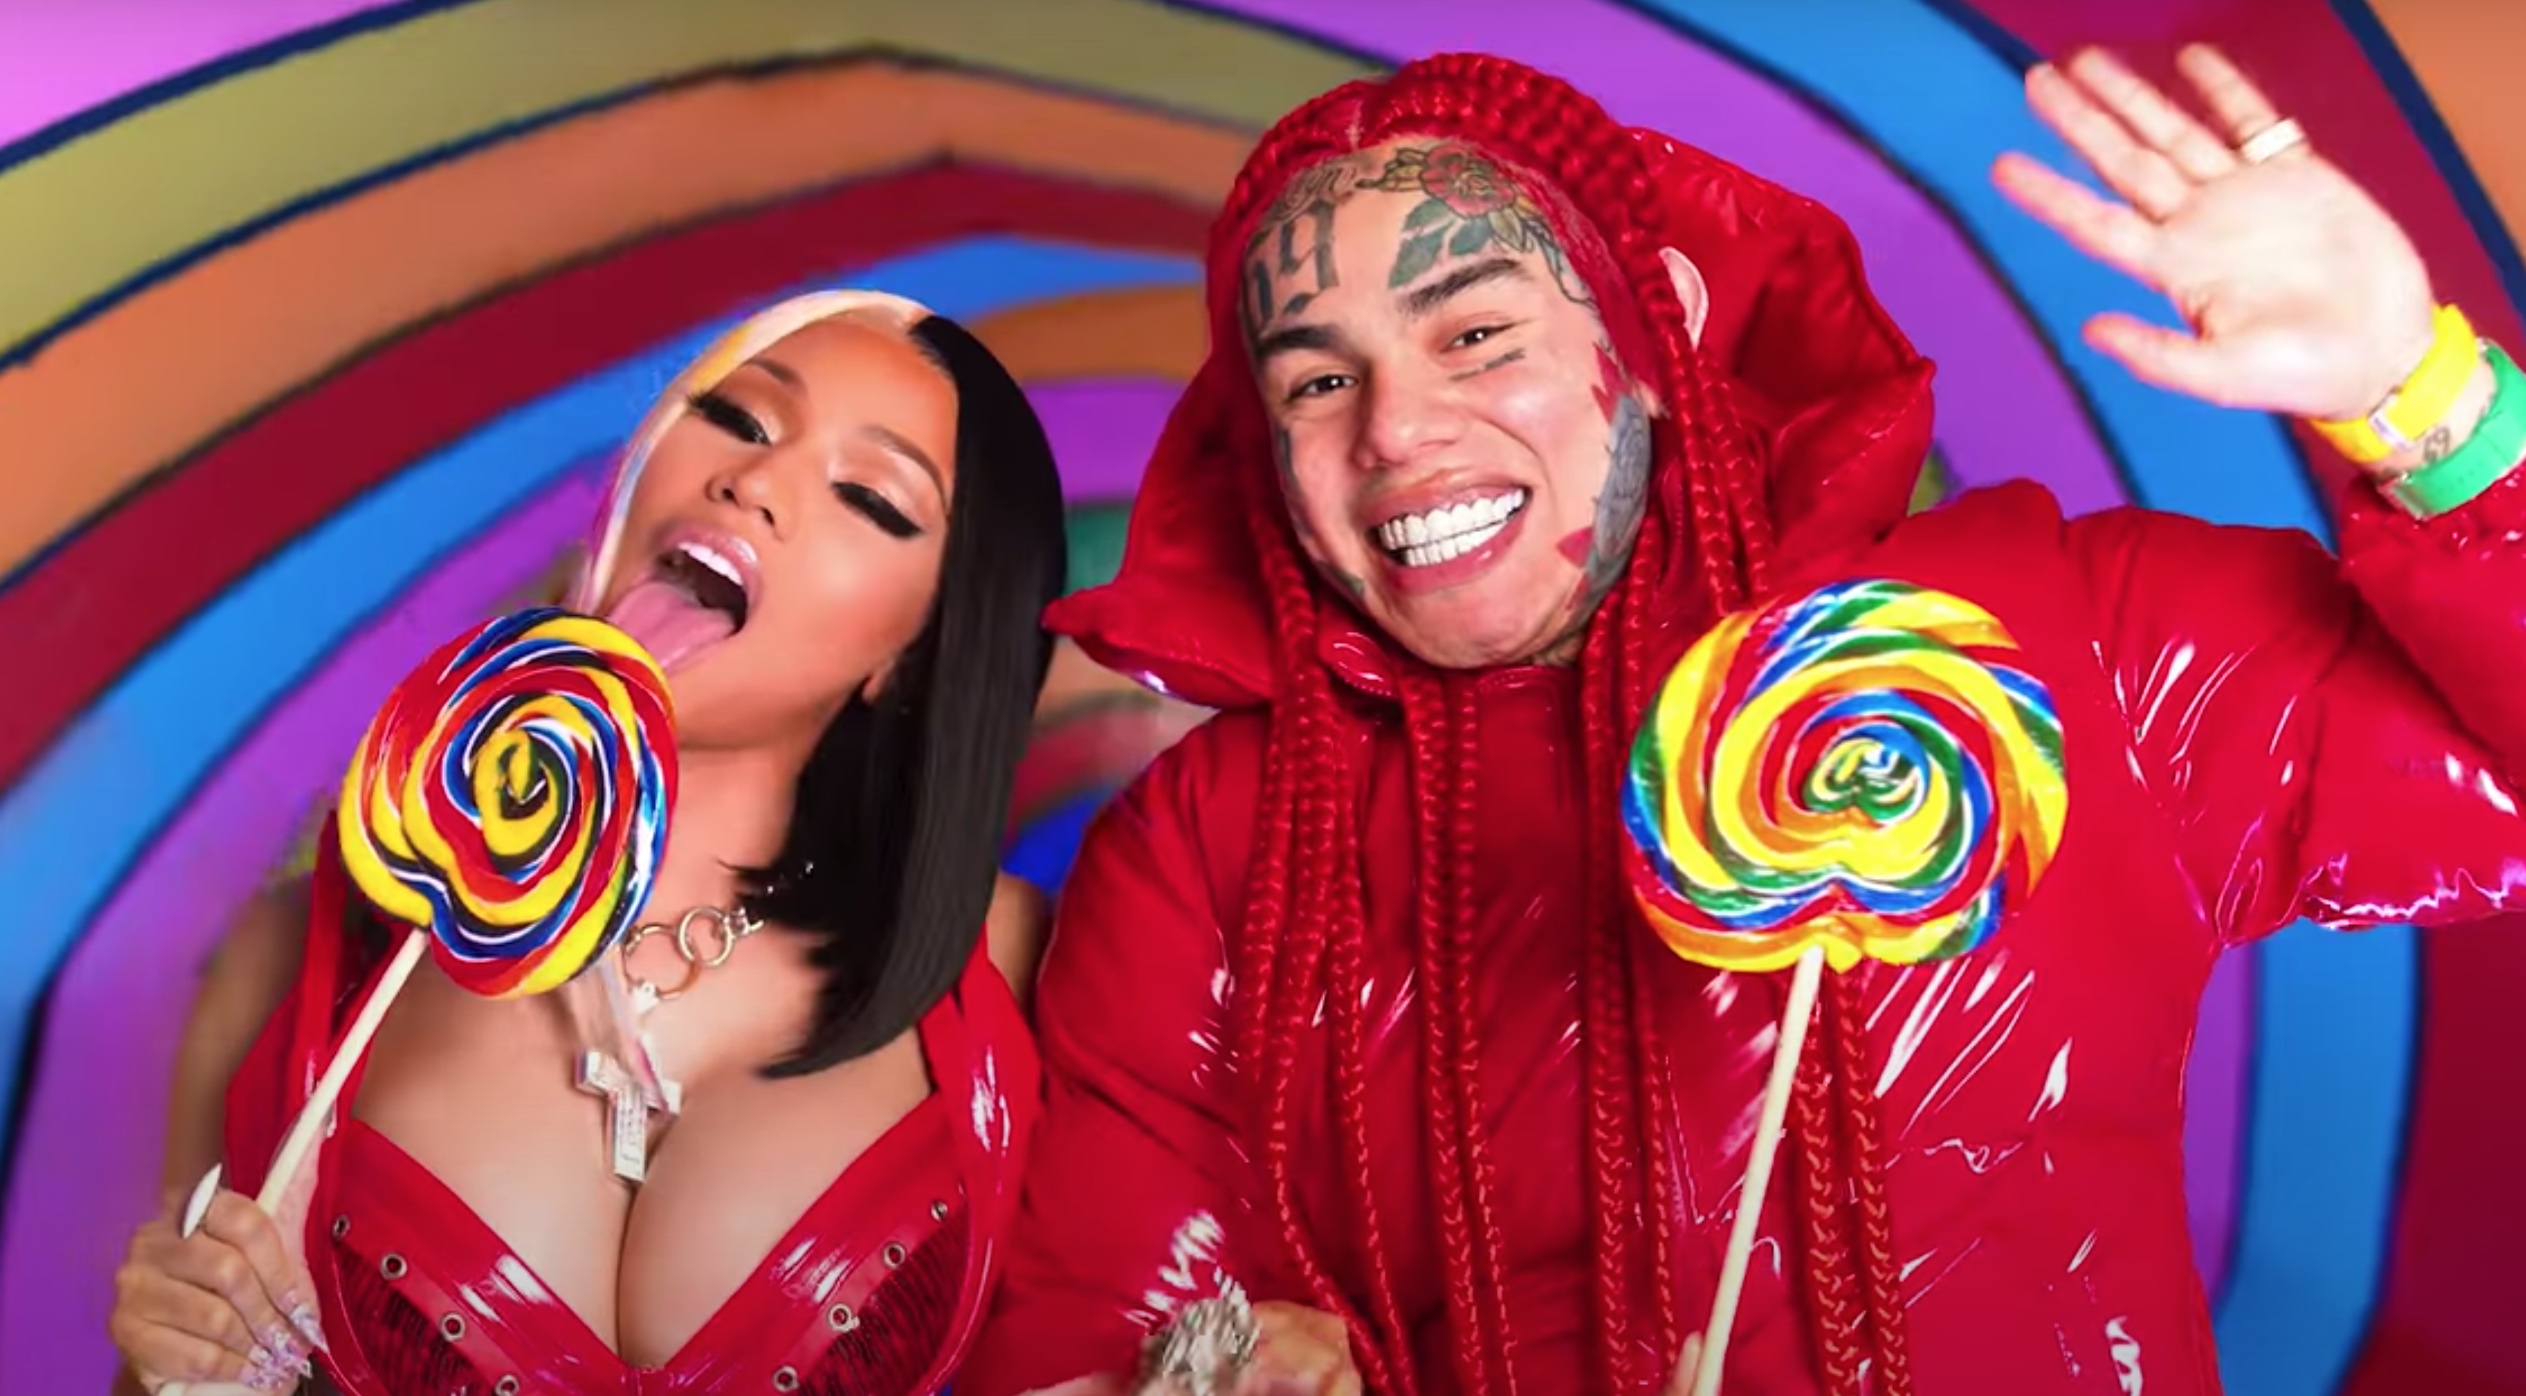 6ix9ine in the visuals for his chart-topping single with Nicki Minaj.